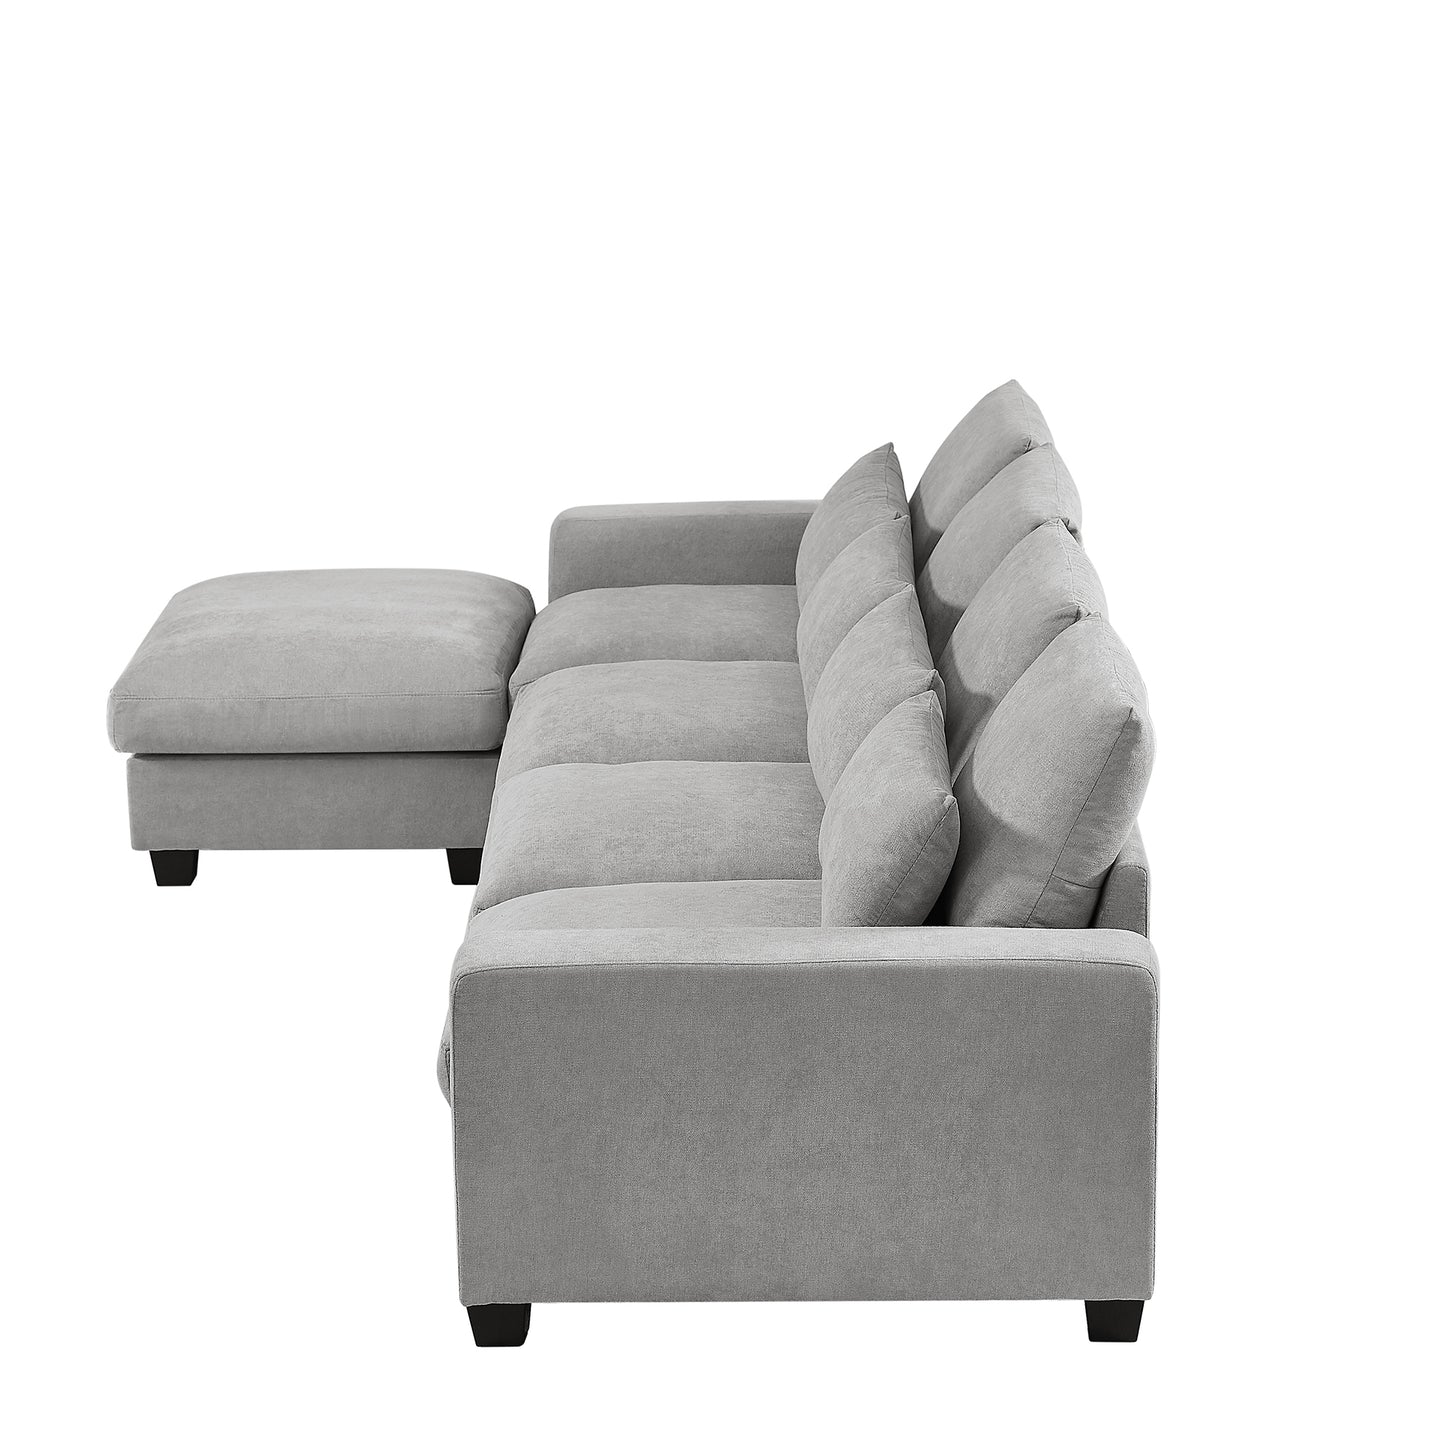 Light Grey Modern Large L-Shape Sectional Sofa,  Convertible Sofa Couch with Reversible Chaise for Living Room